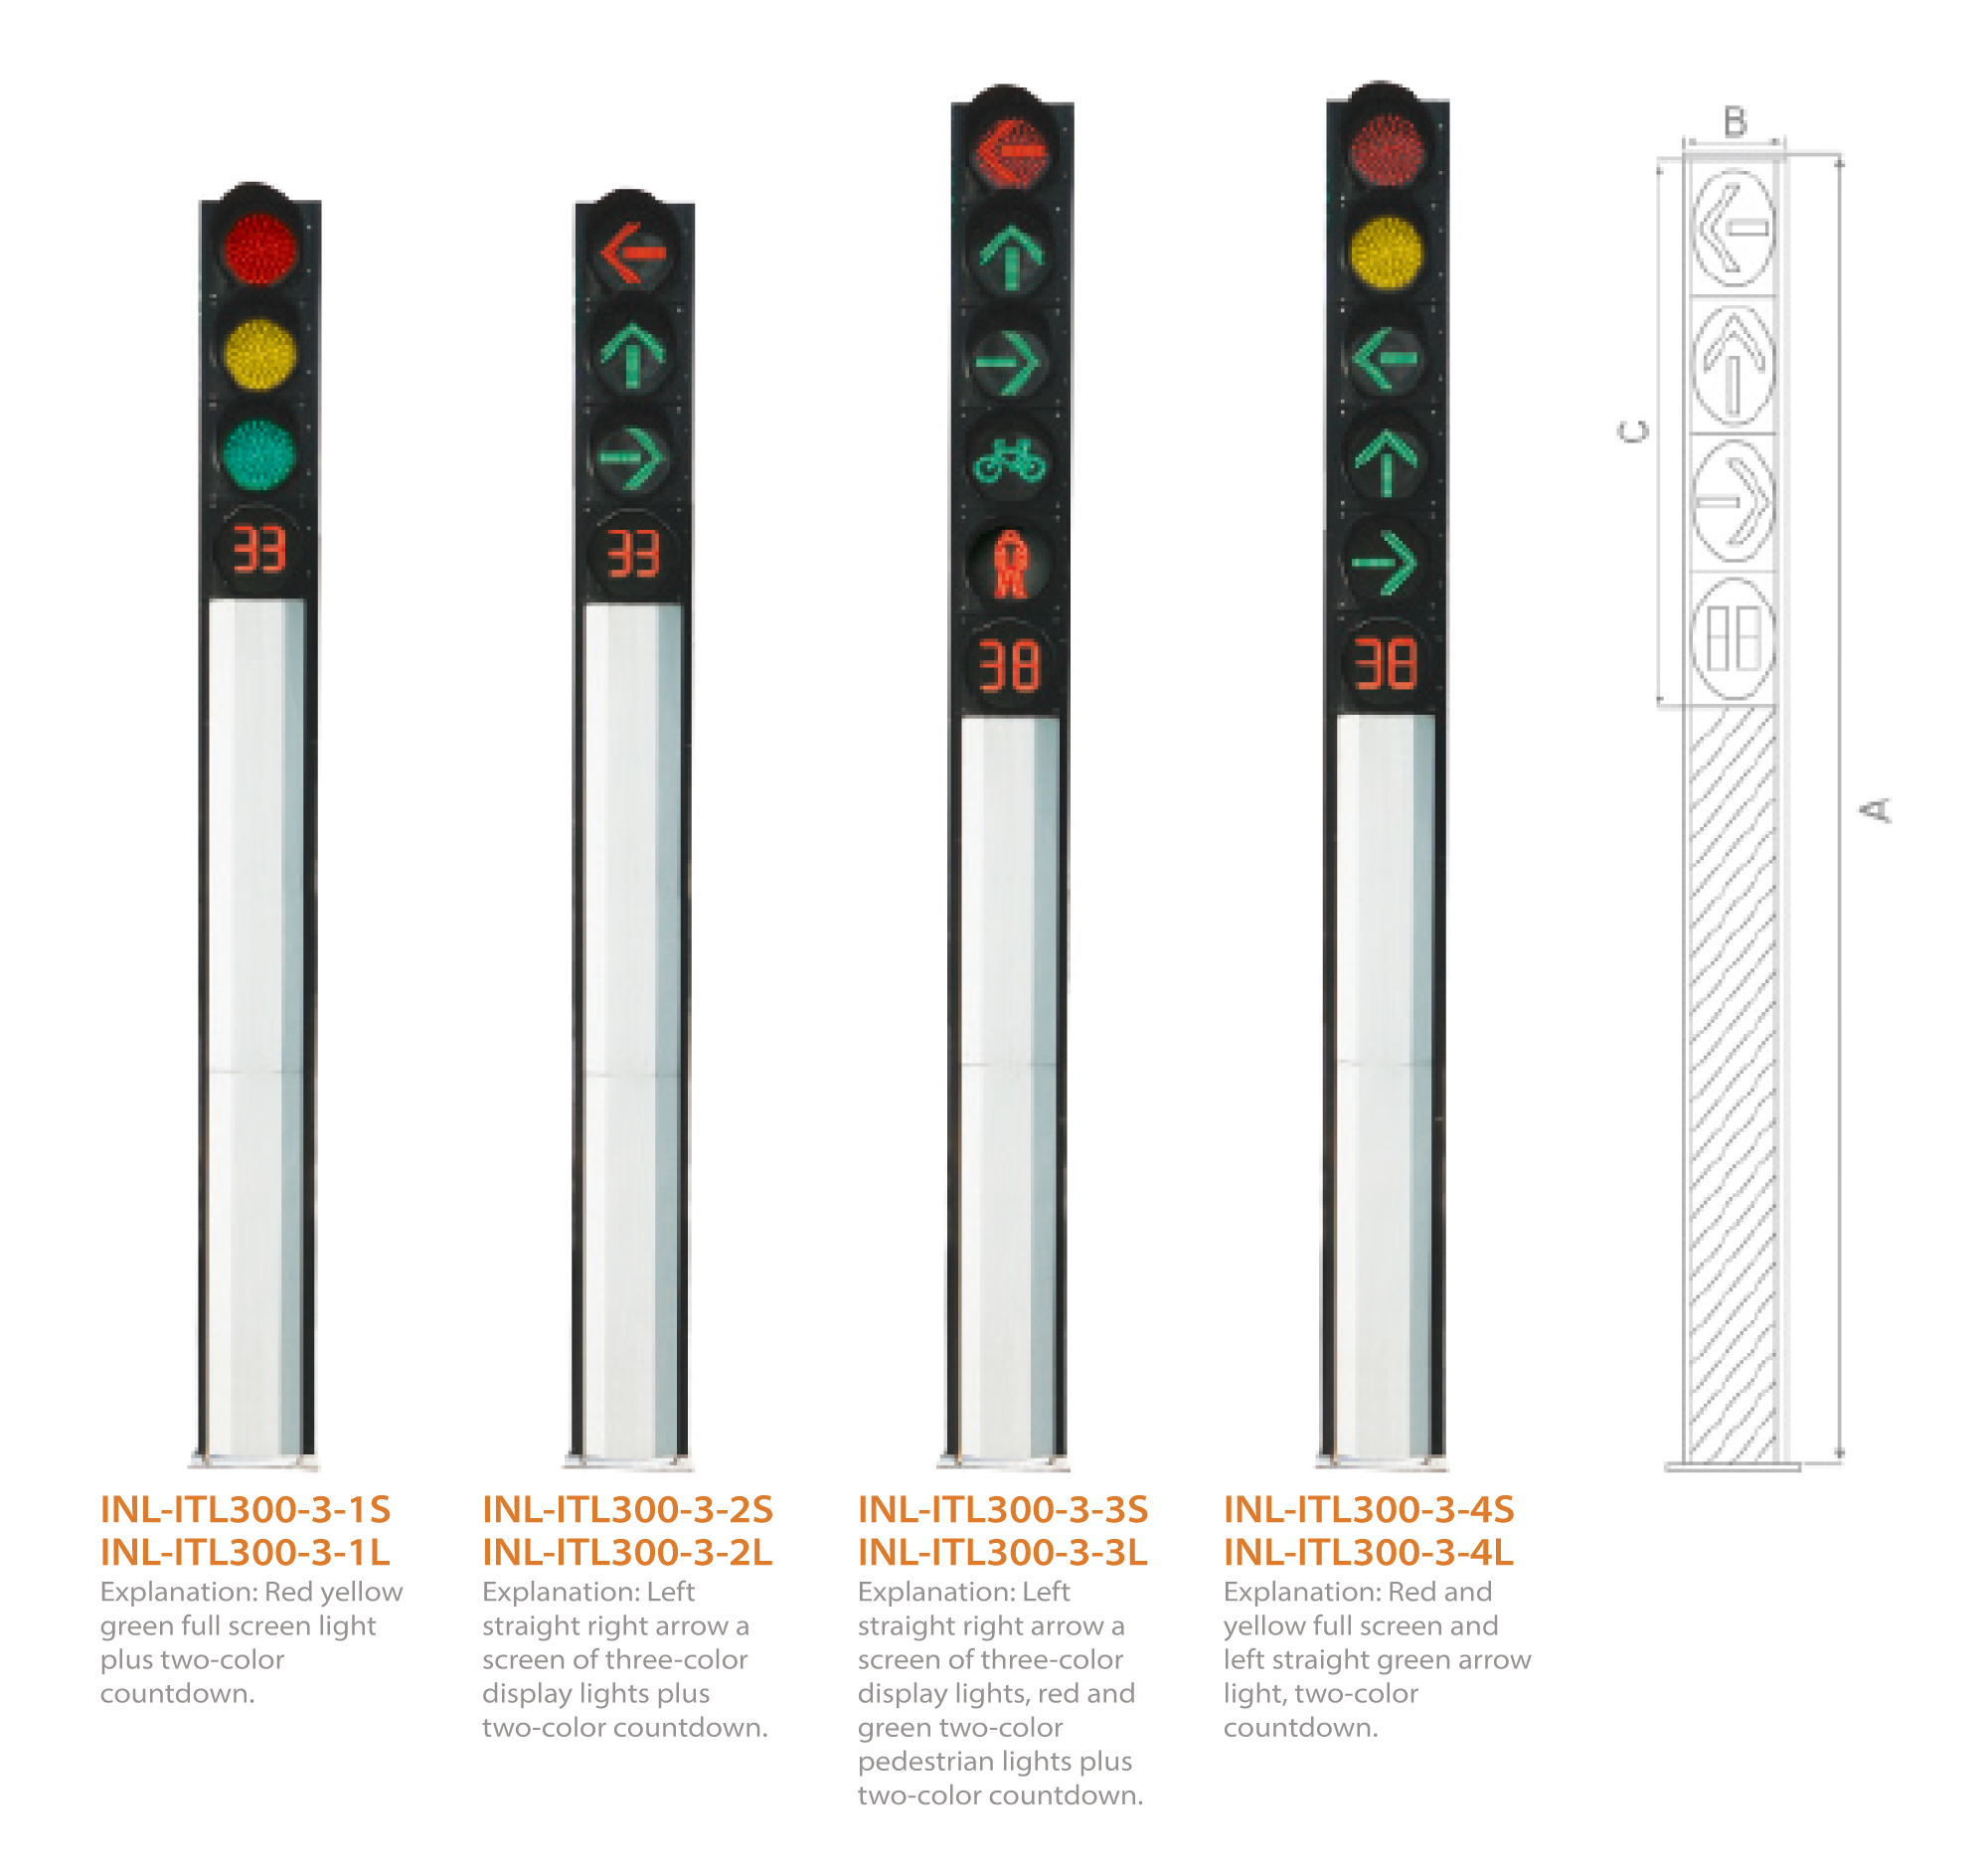 Specifications of Integrated Traffic Light